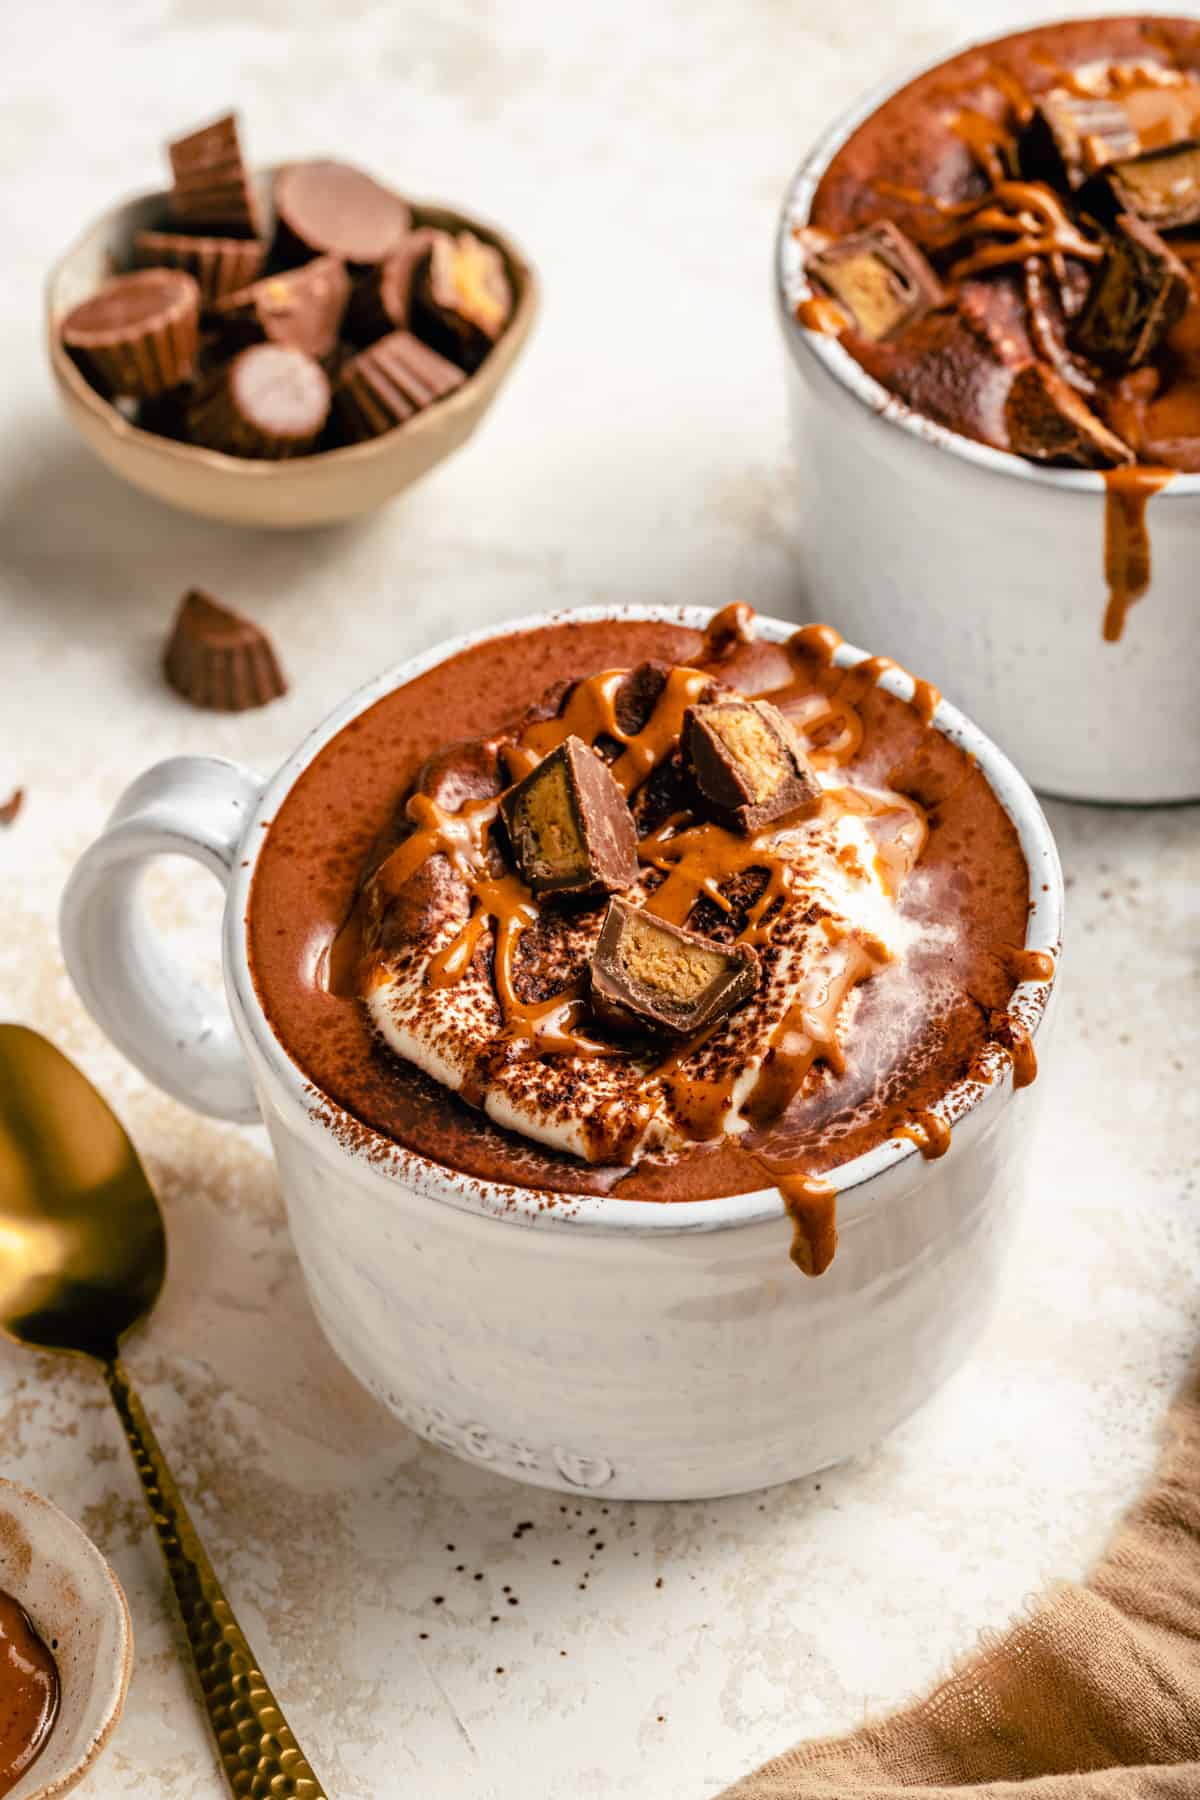 Peanut butter hot chocolate with toppings and a bowl of peanut butter cups behind.